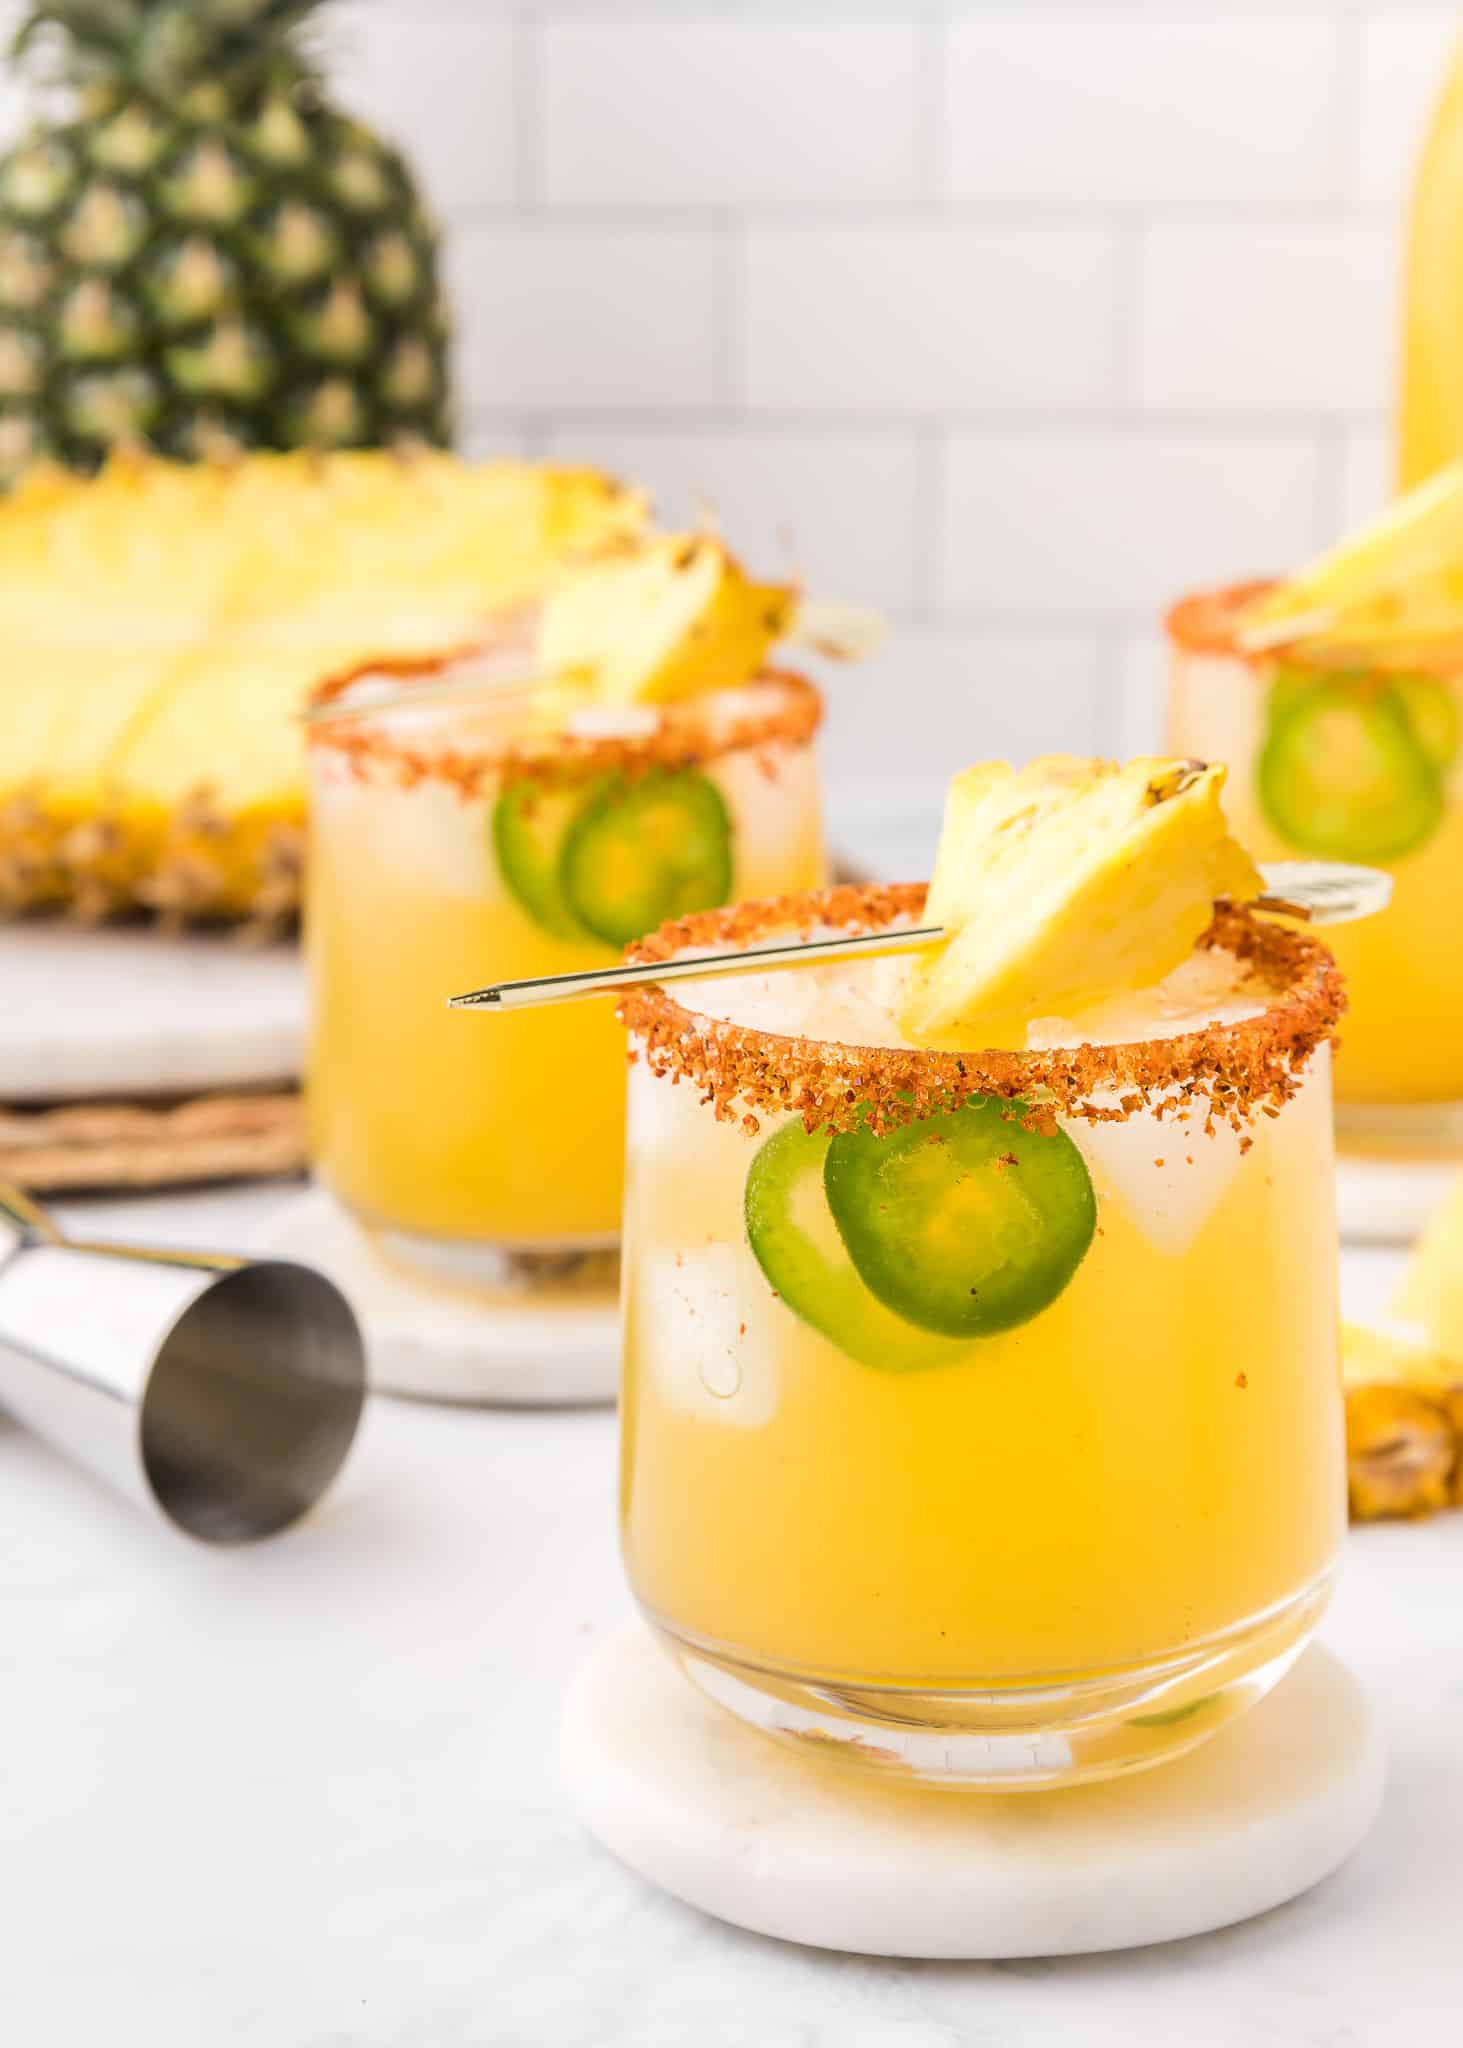 non-alcoholic pineapple drinks: Spicy Pineapple Ginger Mocktail (spicy mocktail with pineapple juice)